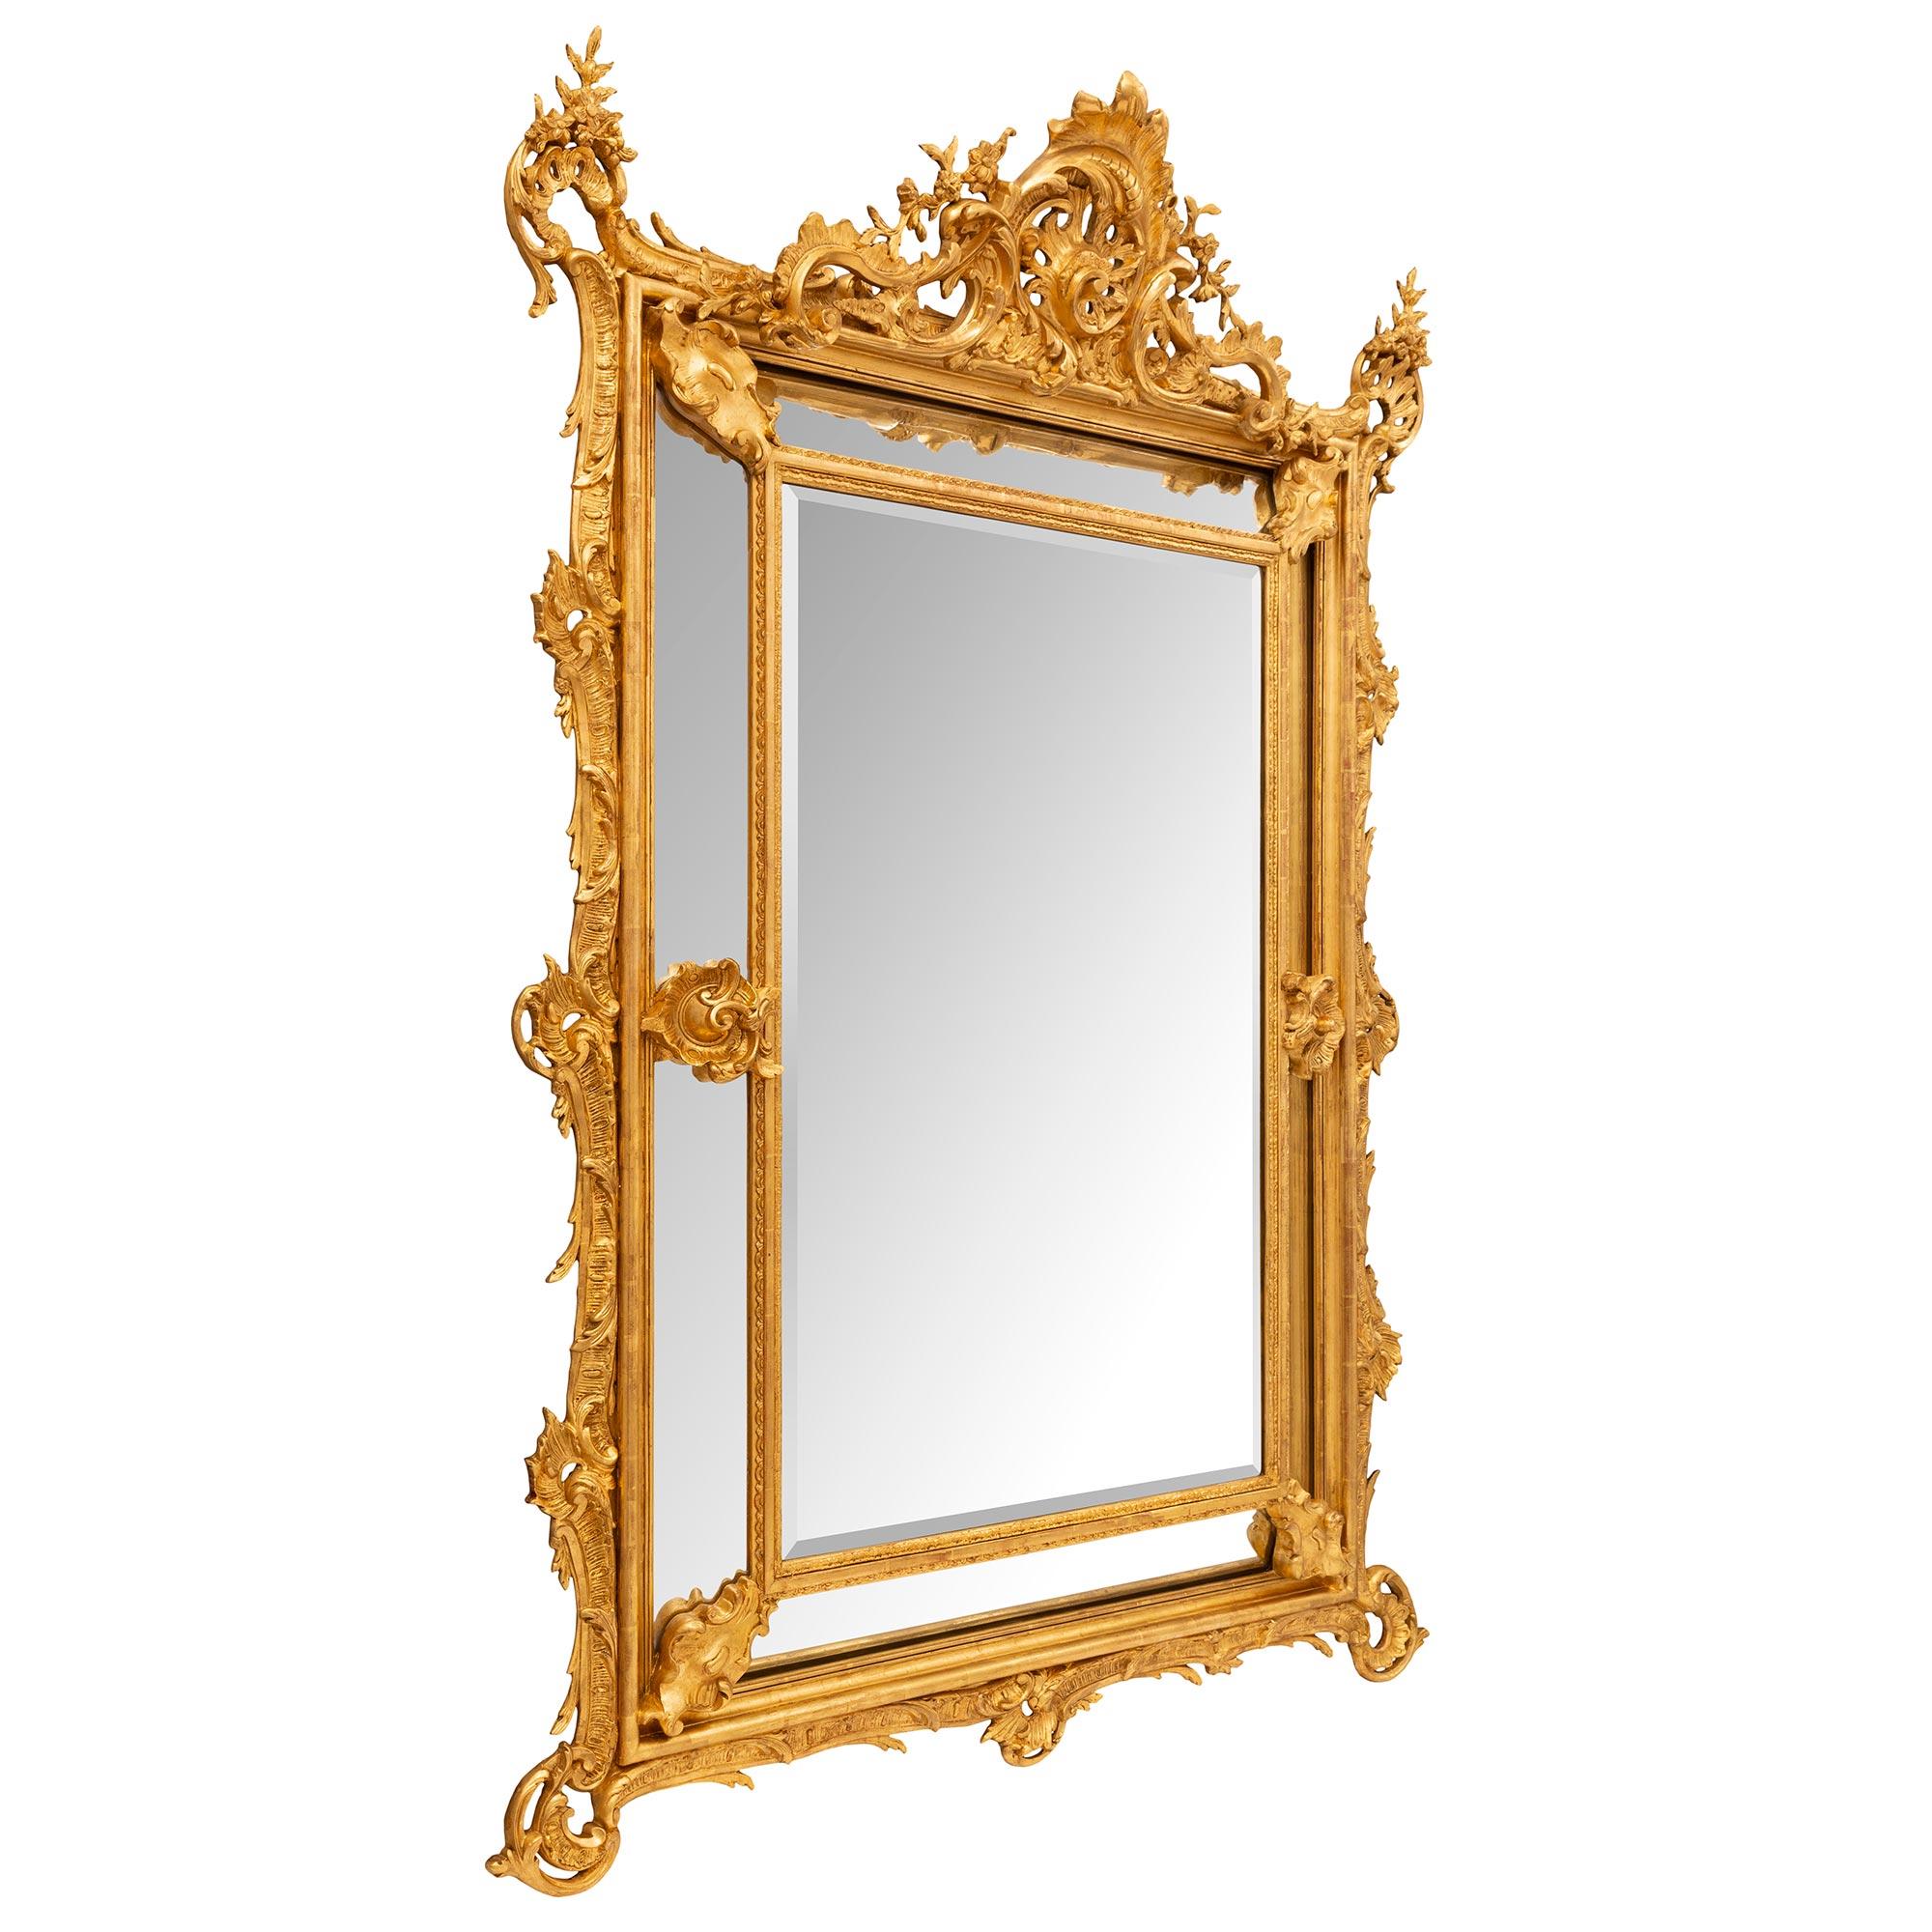 A stunning and extremely unique French 19th century Louis XV st. double framed giltwood mirror. The original central beveled mirror plate is framed within a mottled band with delicate foliate designs. The original outer mirror plates are centered by